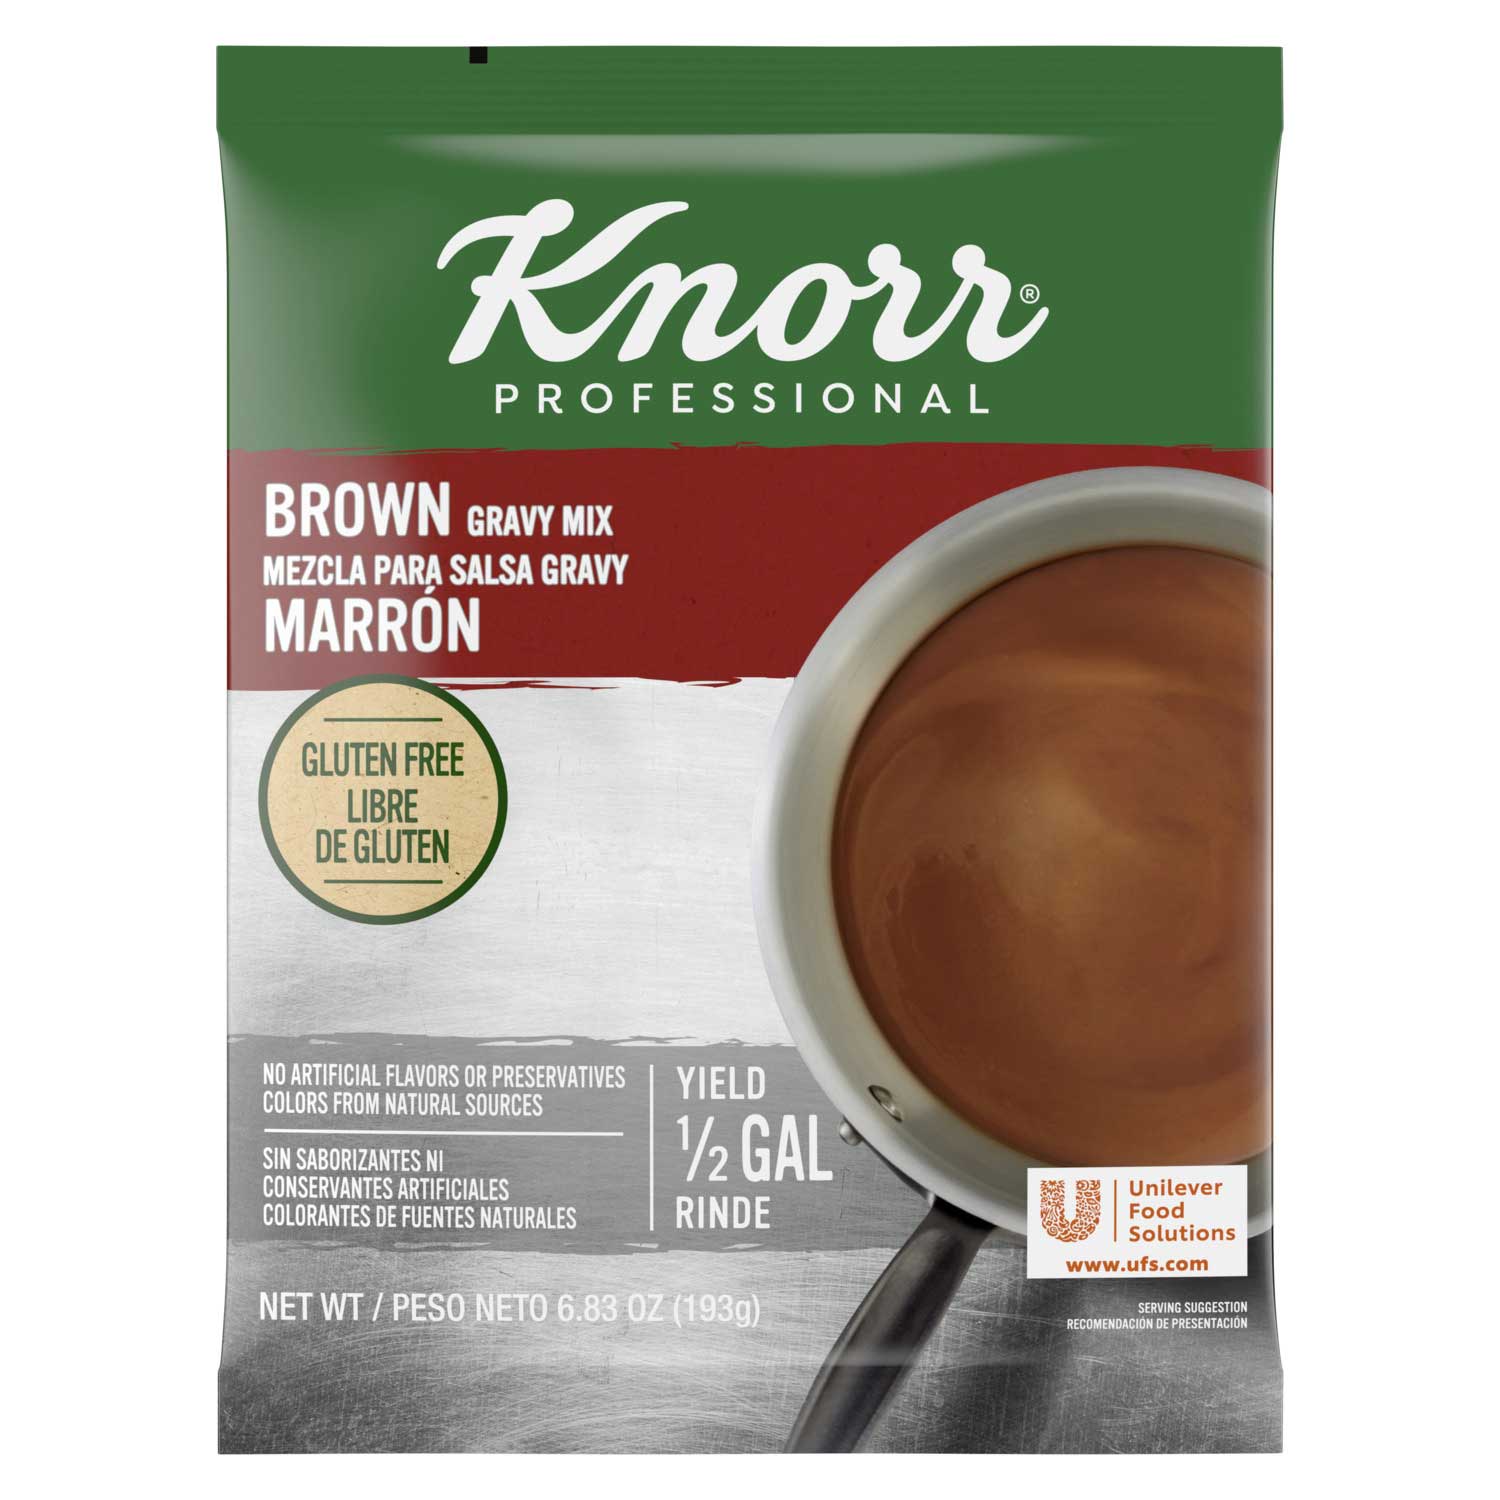 Knorr Professional Brown Gravy Mix, 6.83 ounce -- 6 per case